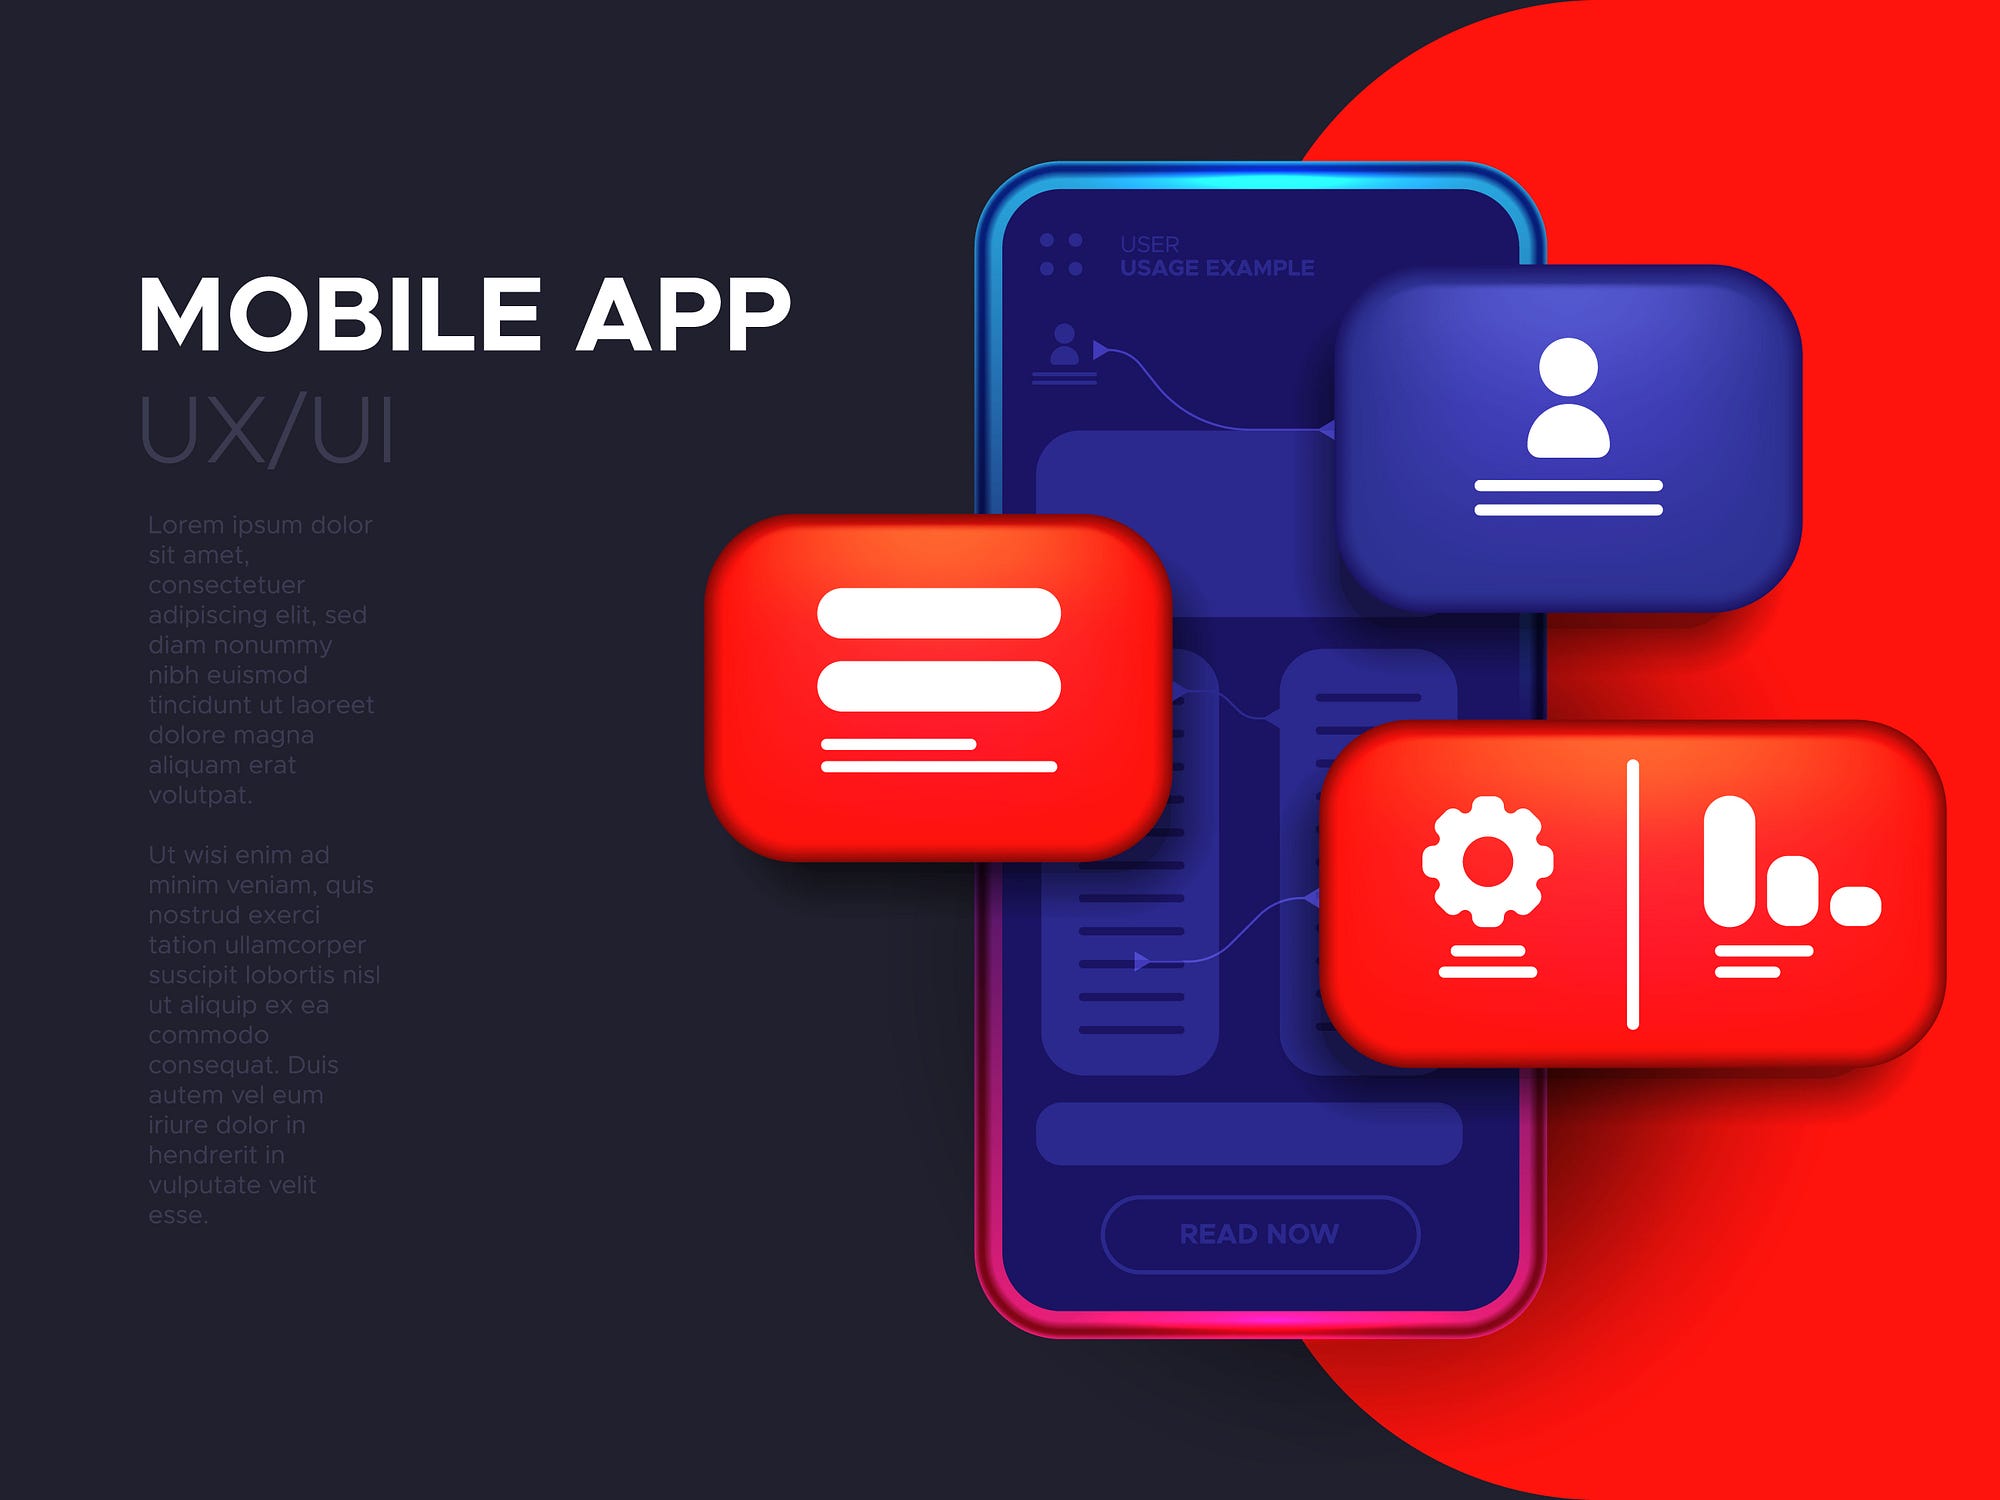 Driving App Downloads with Giveaways: Strategies for Mobile App